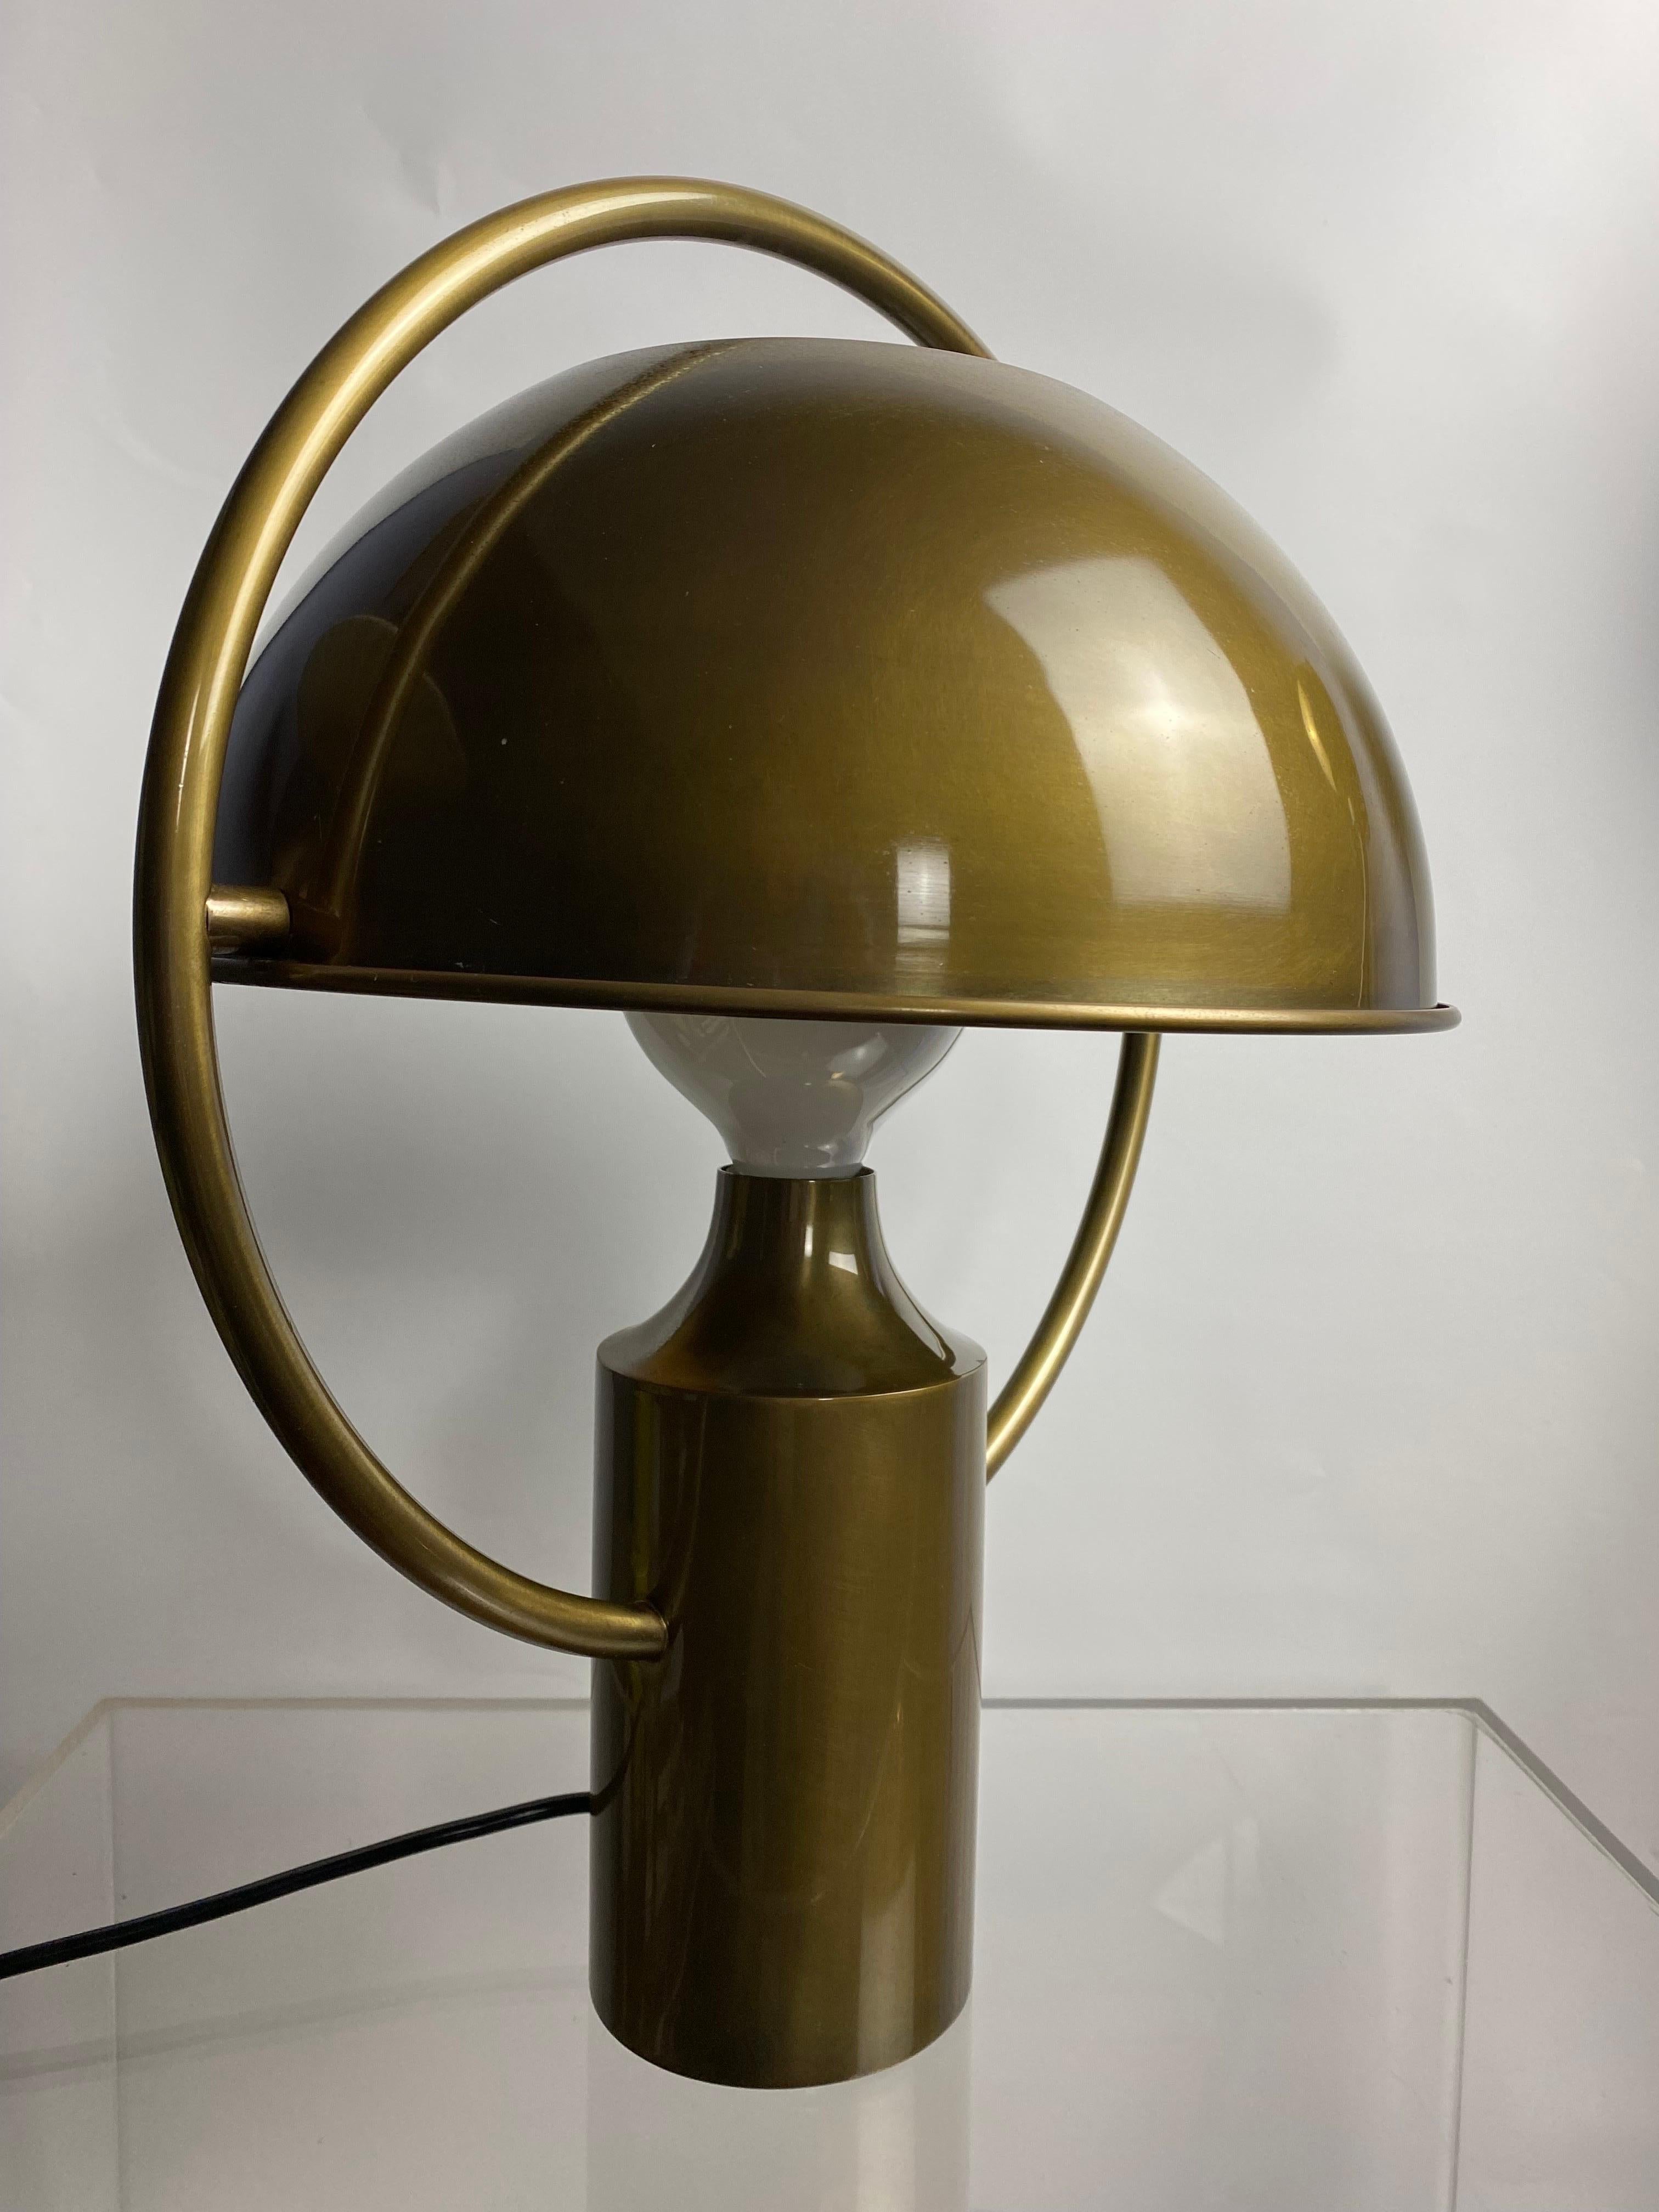 Rare German Midcentury Table Lamp in Solid Brass by Günter&Florian Schulz 1970s For Sale 12